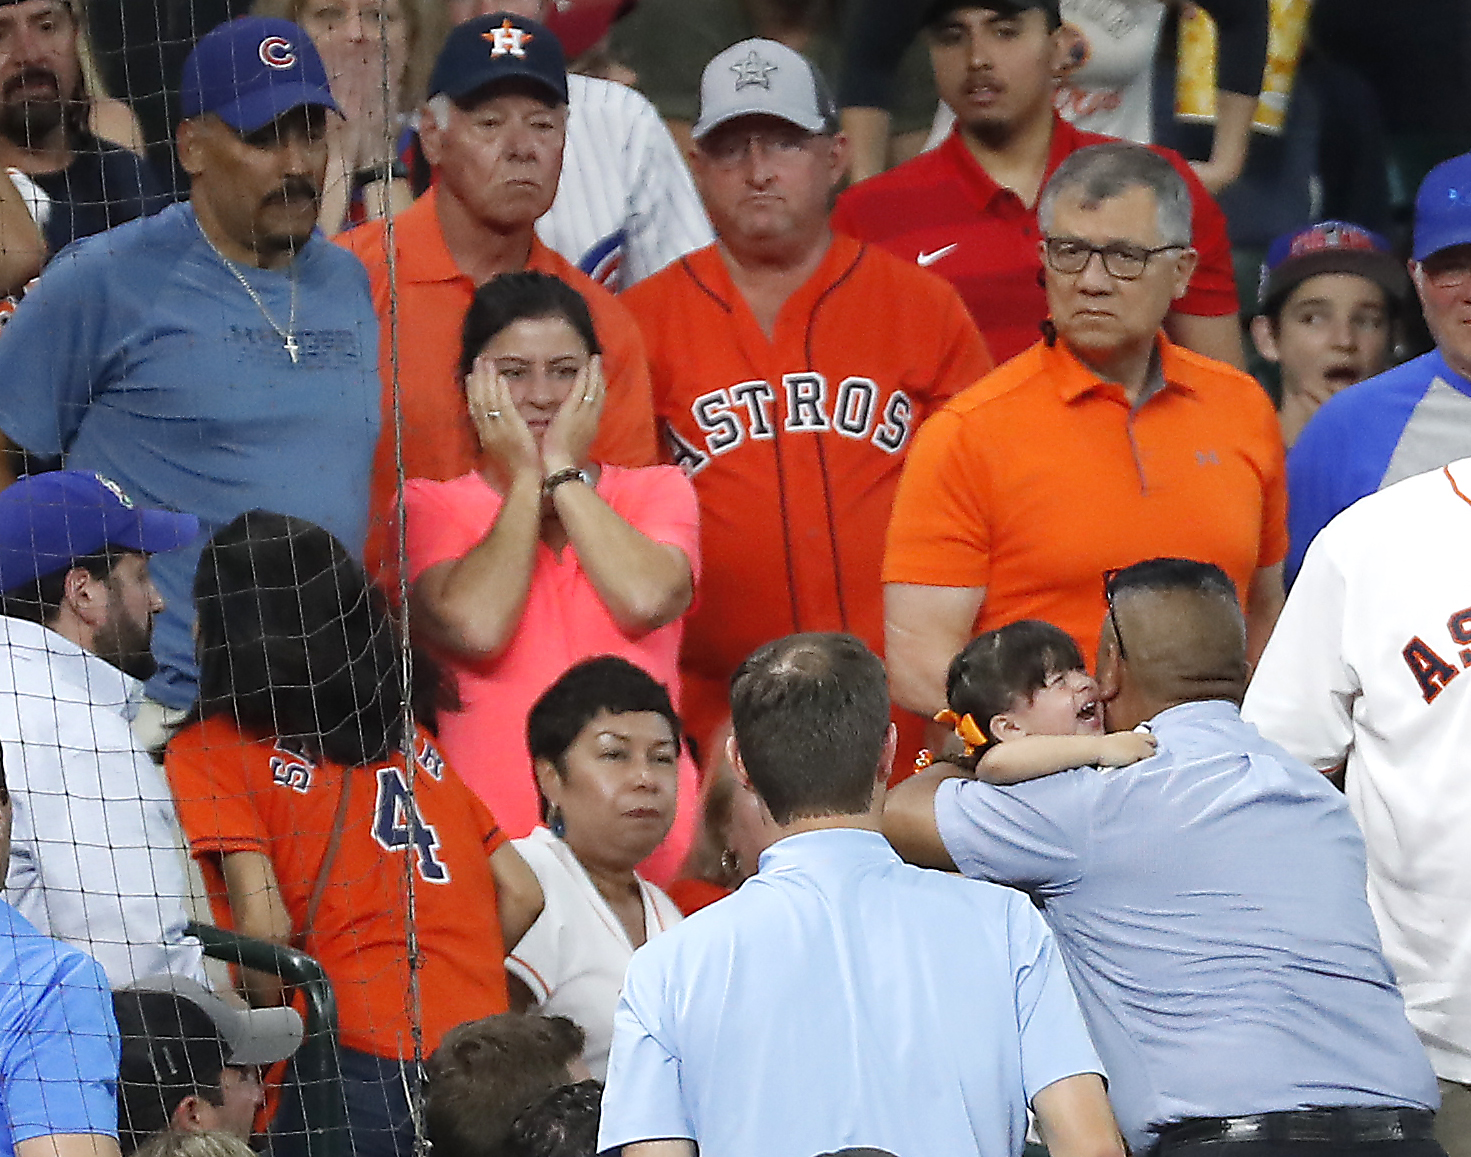 Young fan struck by foul ball during AstrosCubs game